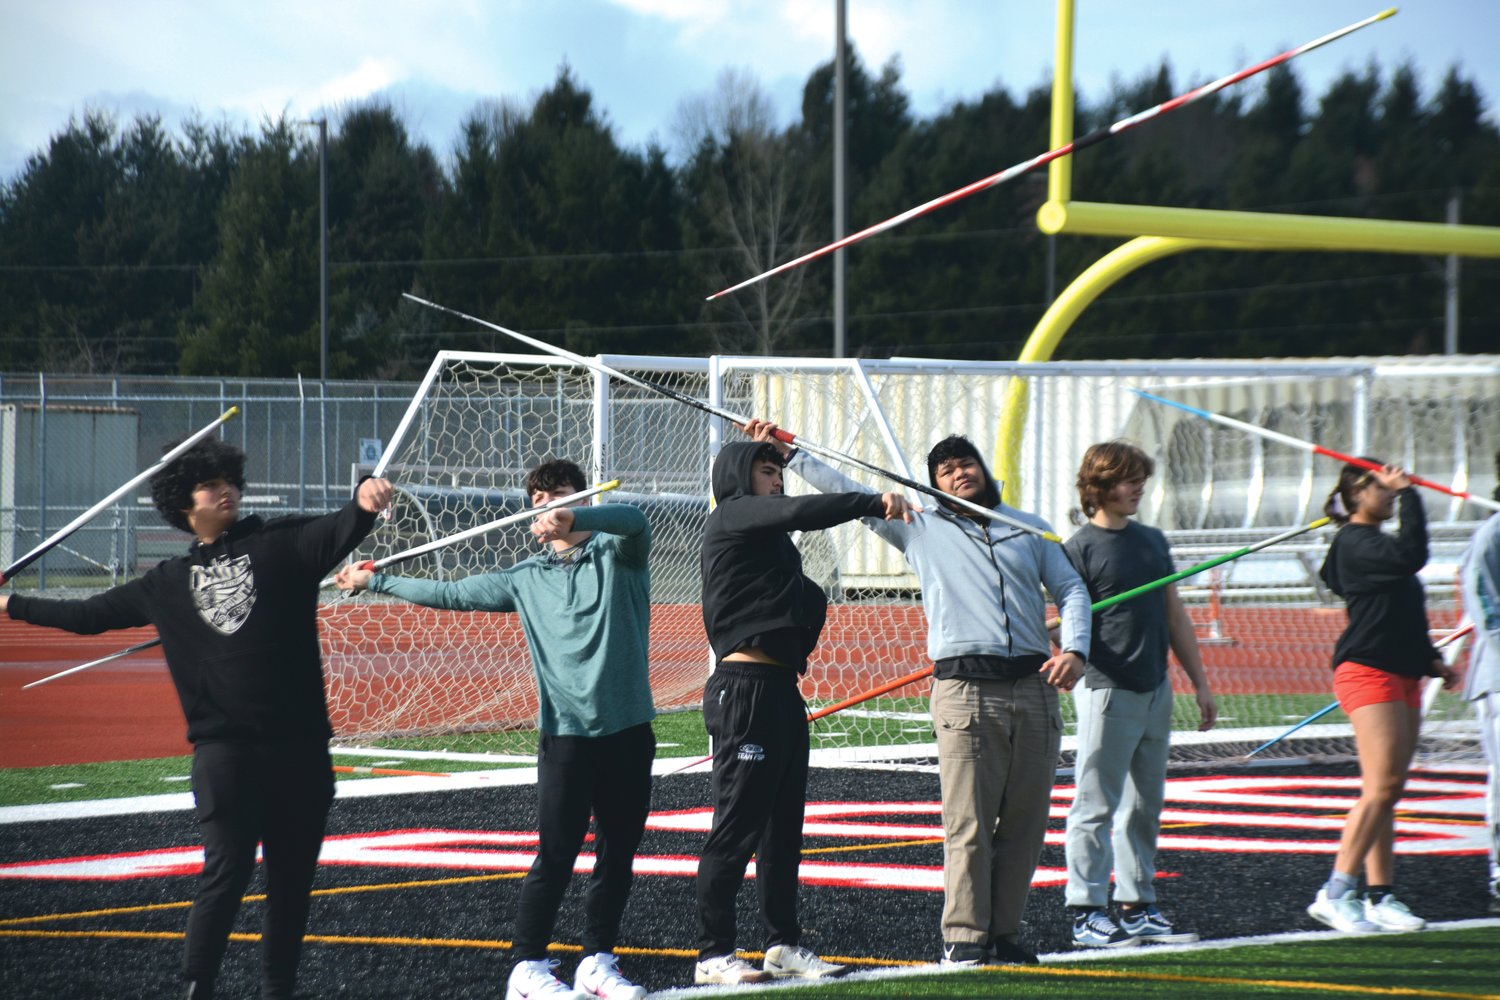 Yelm javelin throwers participate in a warm-up exercise at practice on Friday, March 10.